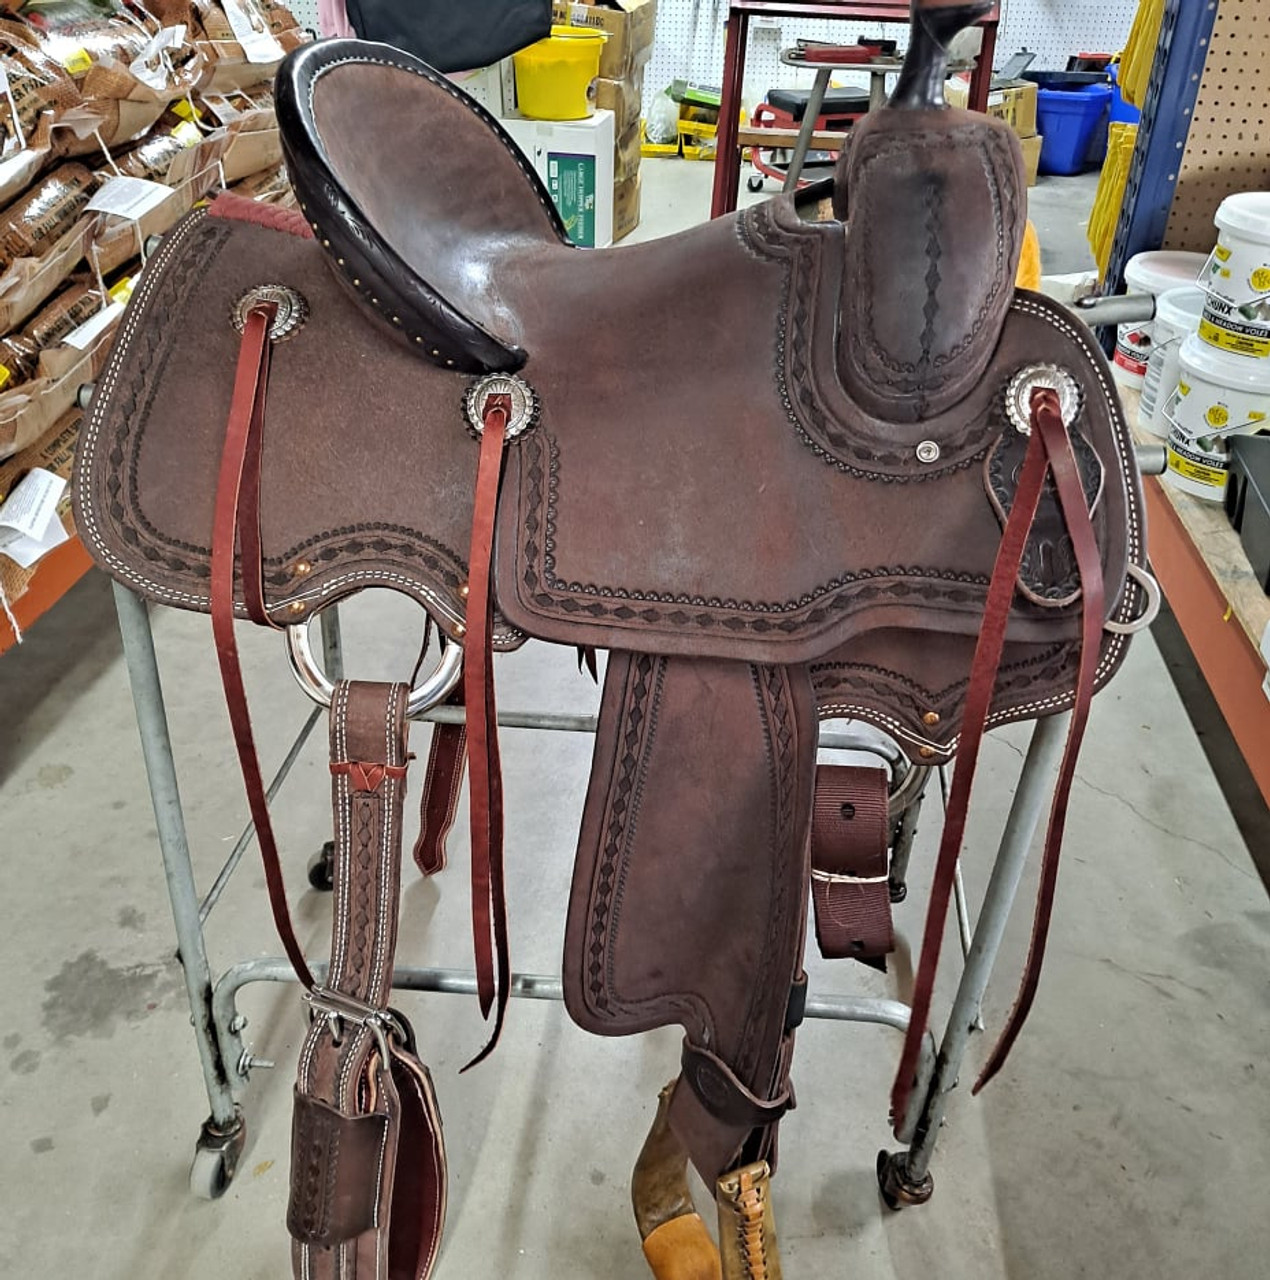 New All Around Saddle by Fort Worth Saddle Co with 13.5 inch seat. Built on our new proprietary Jplus "hog-bars" roping tree, our new all-around saddle is lightweight, but can be roped from. Limited lifetime warranty on tree. Constructed of Hermann Oak leather. Hand tooled. Secure pencil roll seat. Drop-rigged for added stability. Gullet size is 8.25 inch, weight is 35lbs, and skirt is 26 inch. Made in USA. Limited lifetime warranty.

S1399